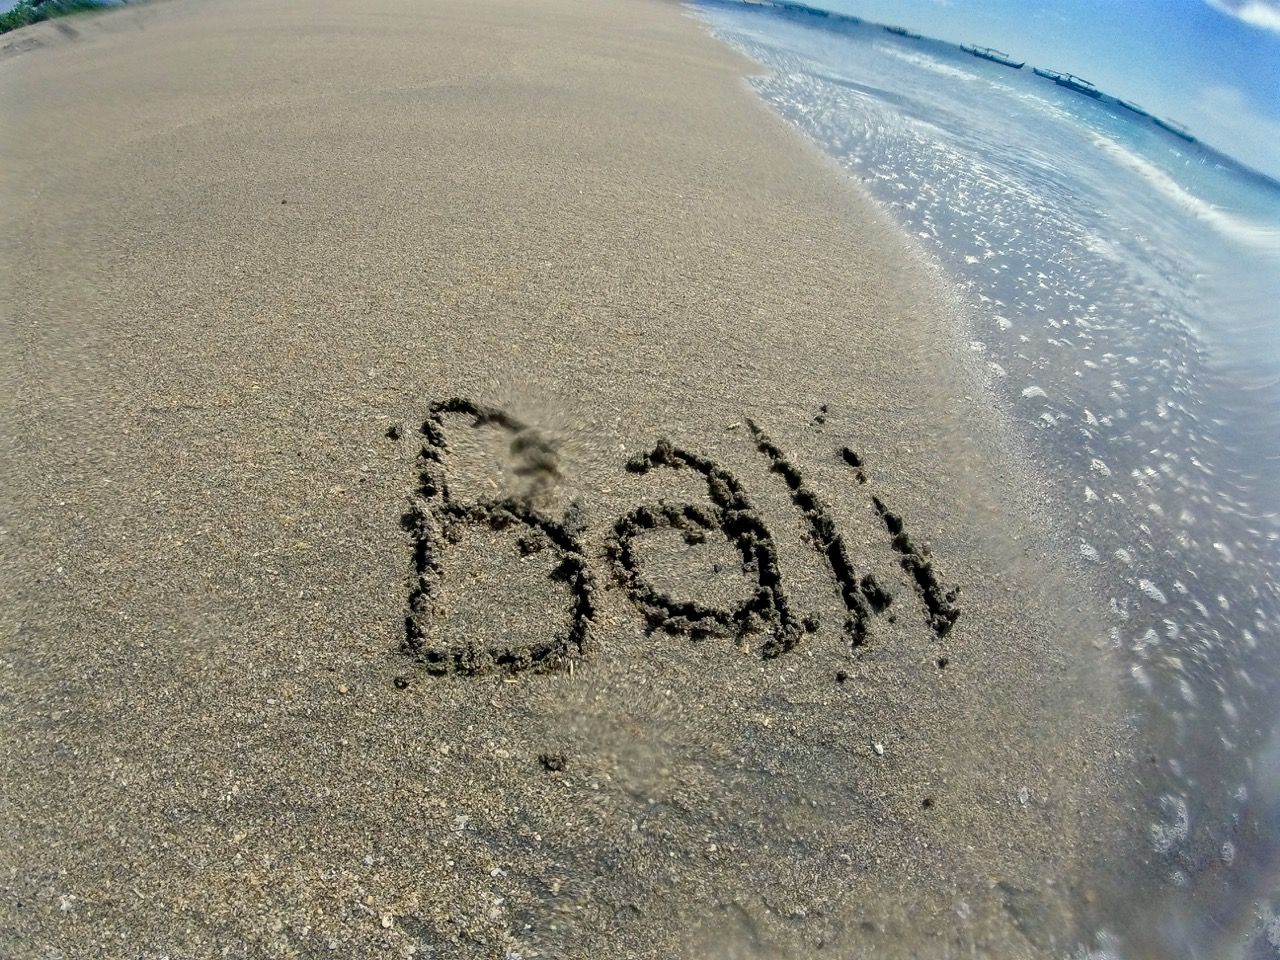 The word "Bali" written in the sand.